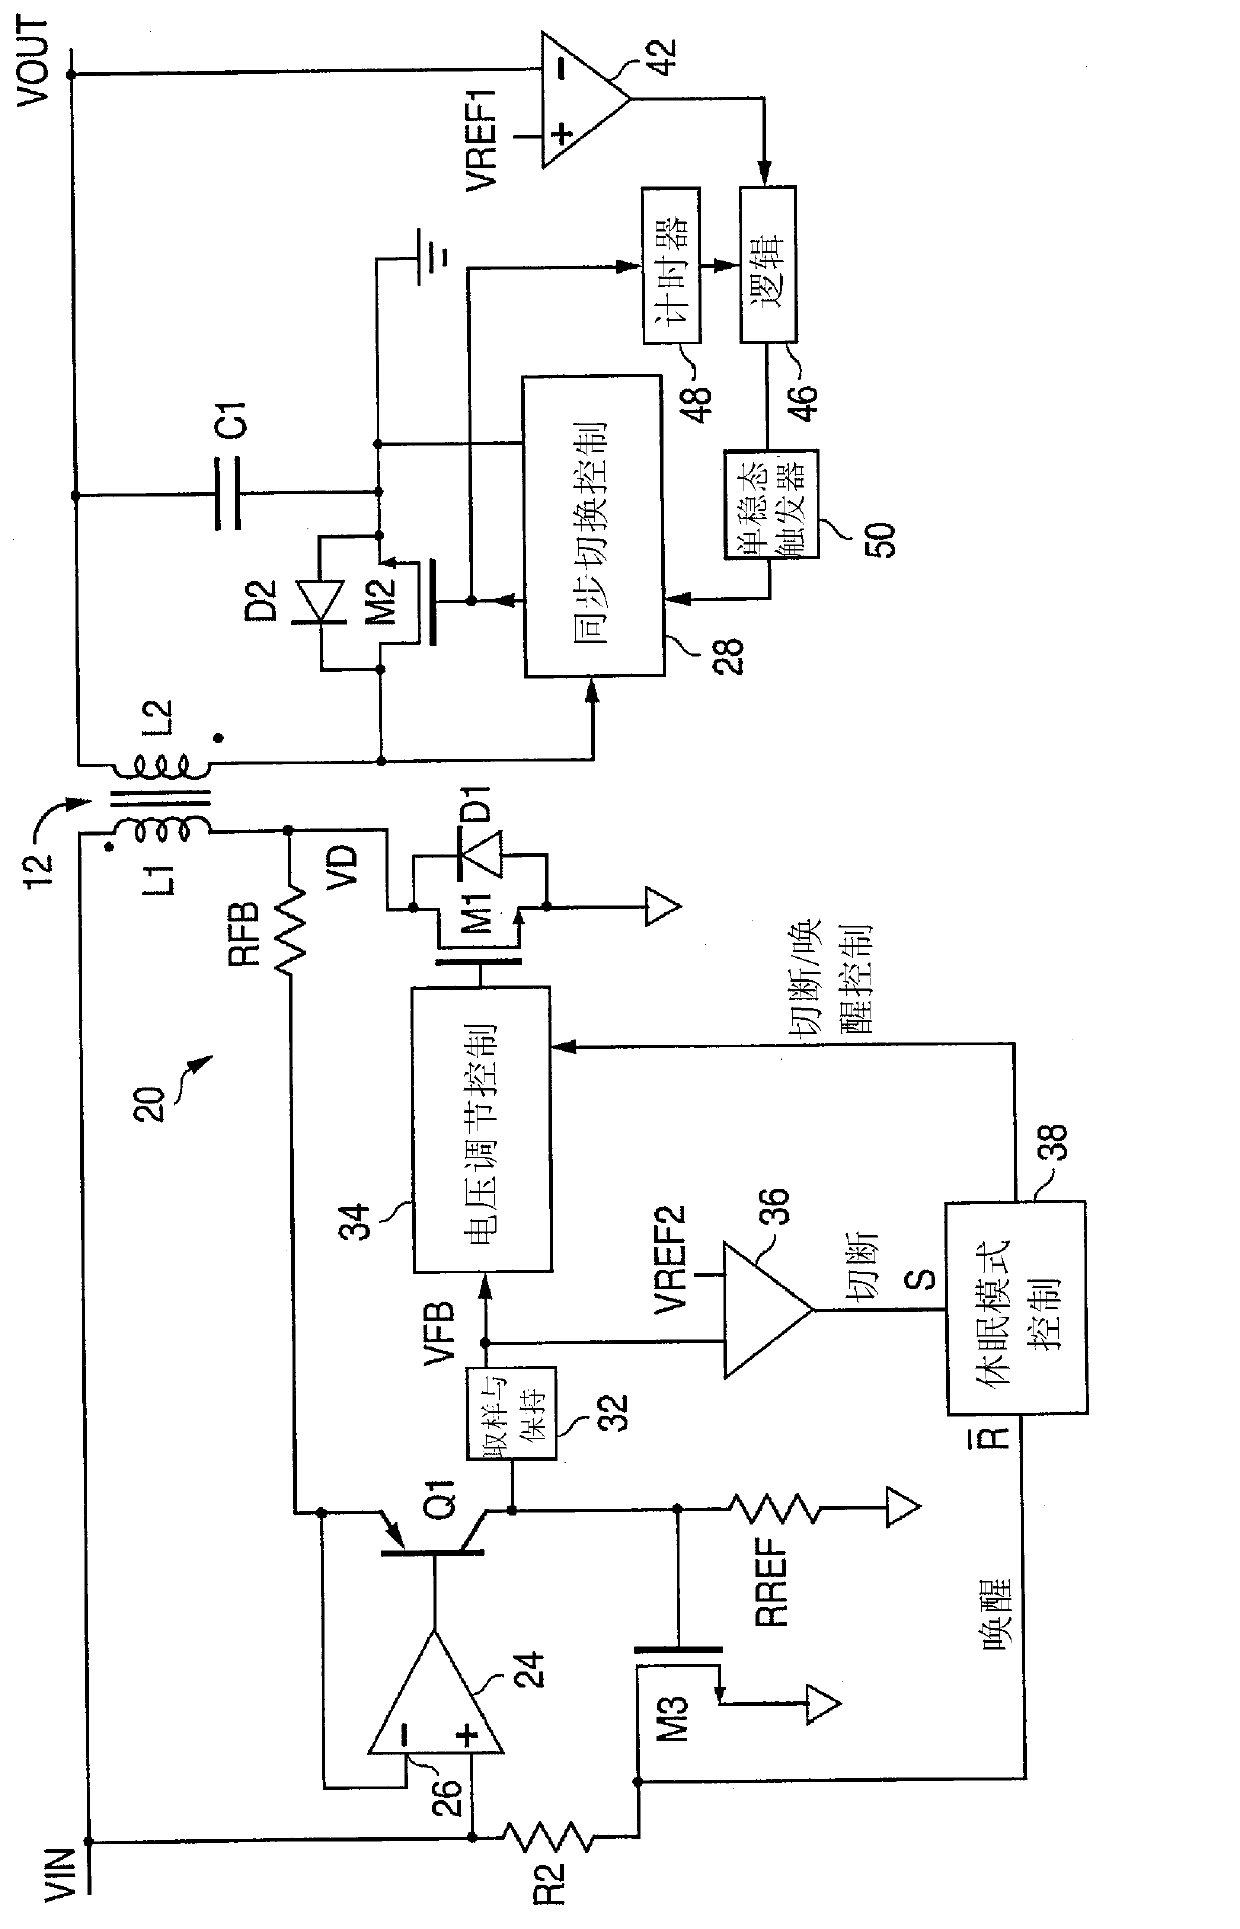 Isolated flyback converter with sleep mode for light load operation